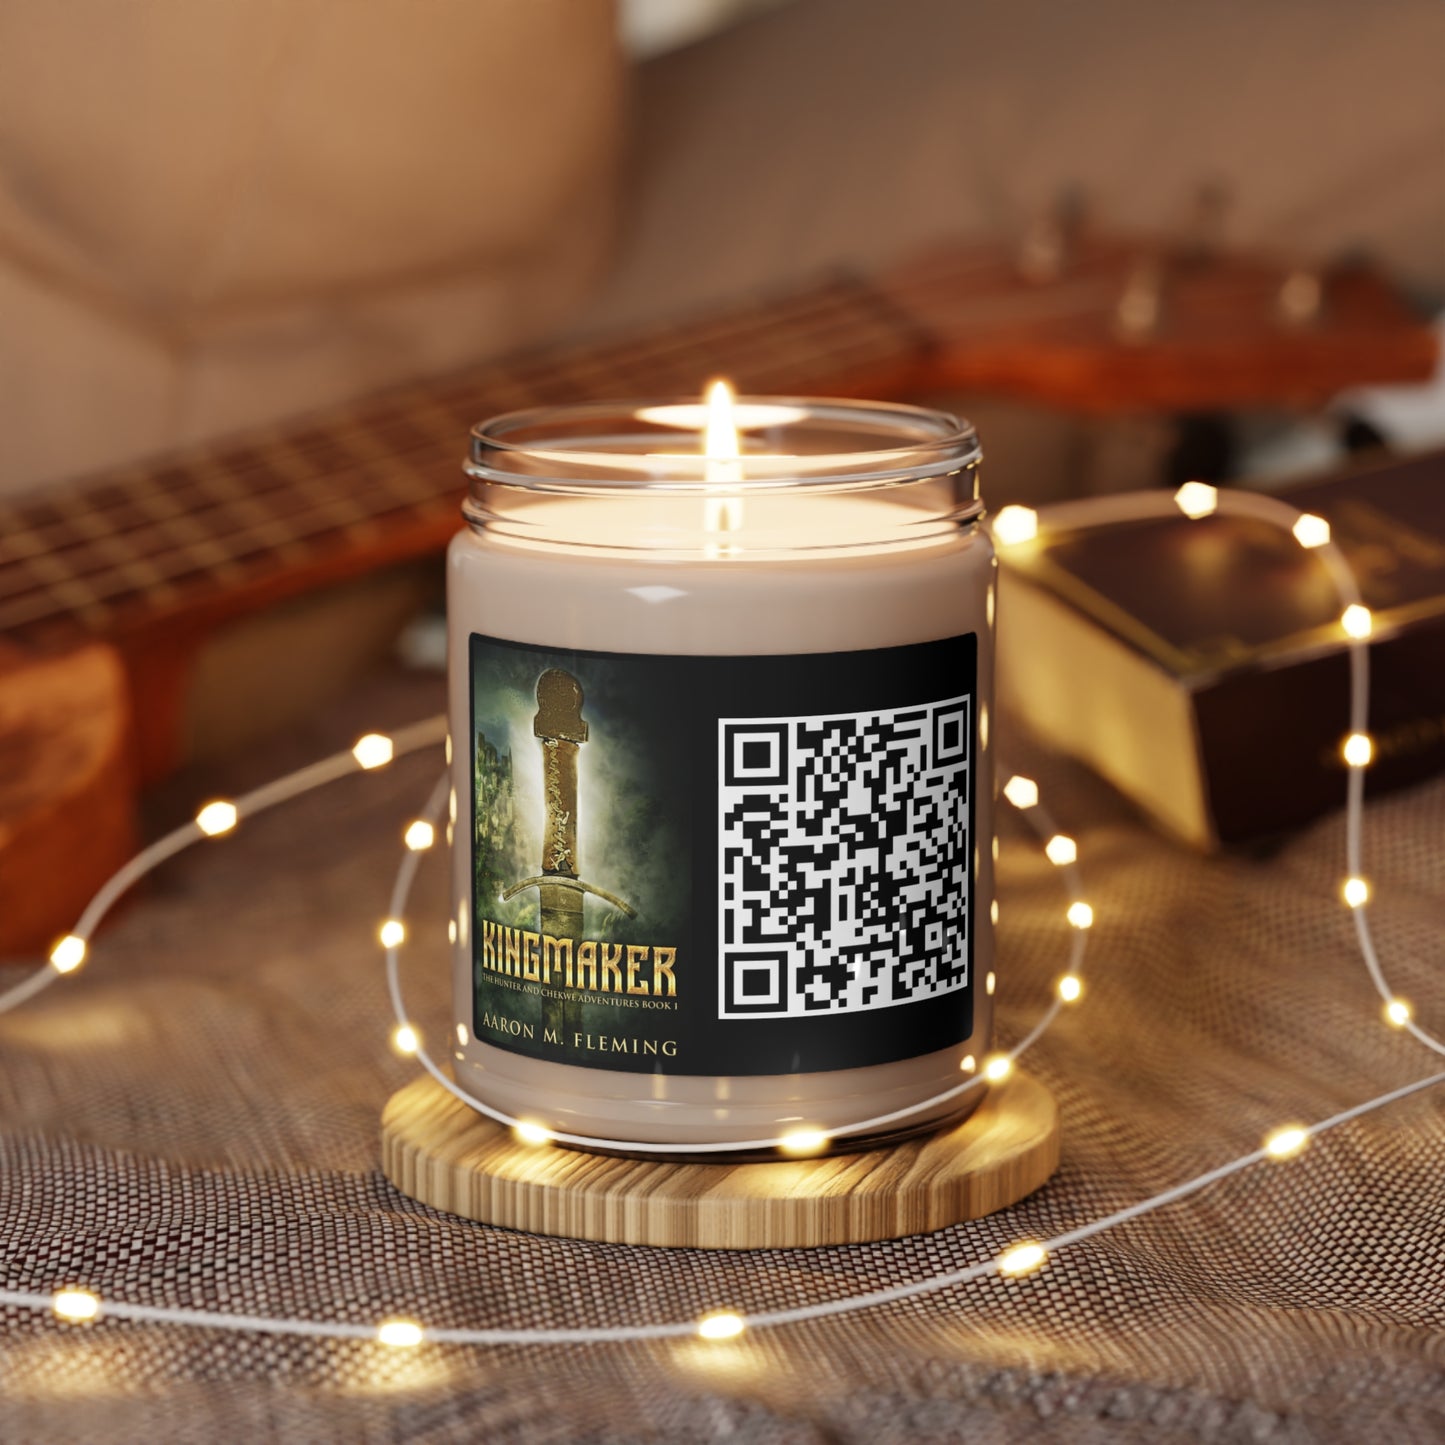 Kingmaker - Scented Soy Candle